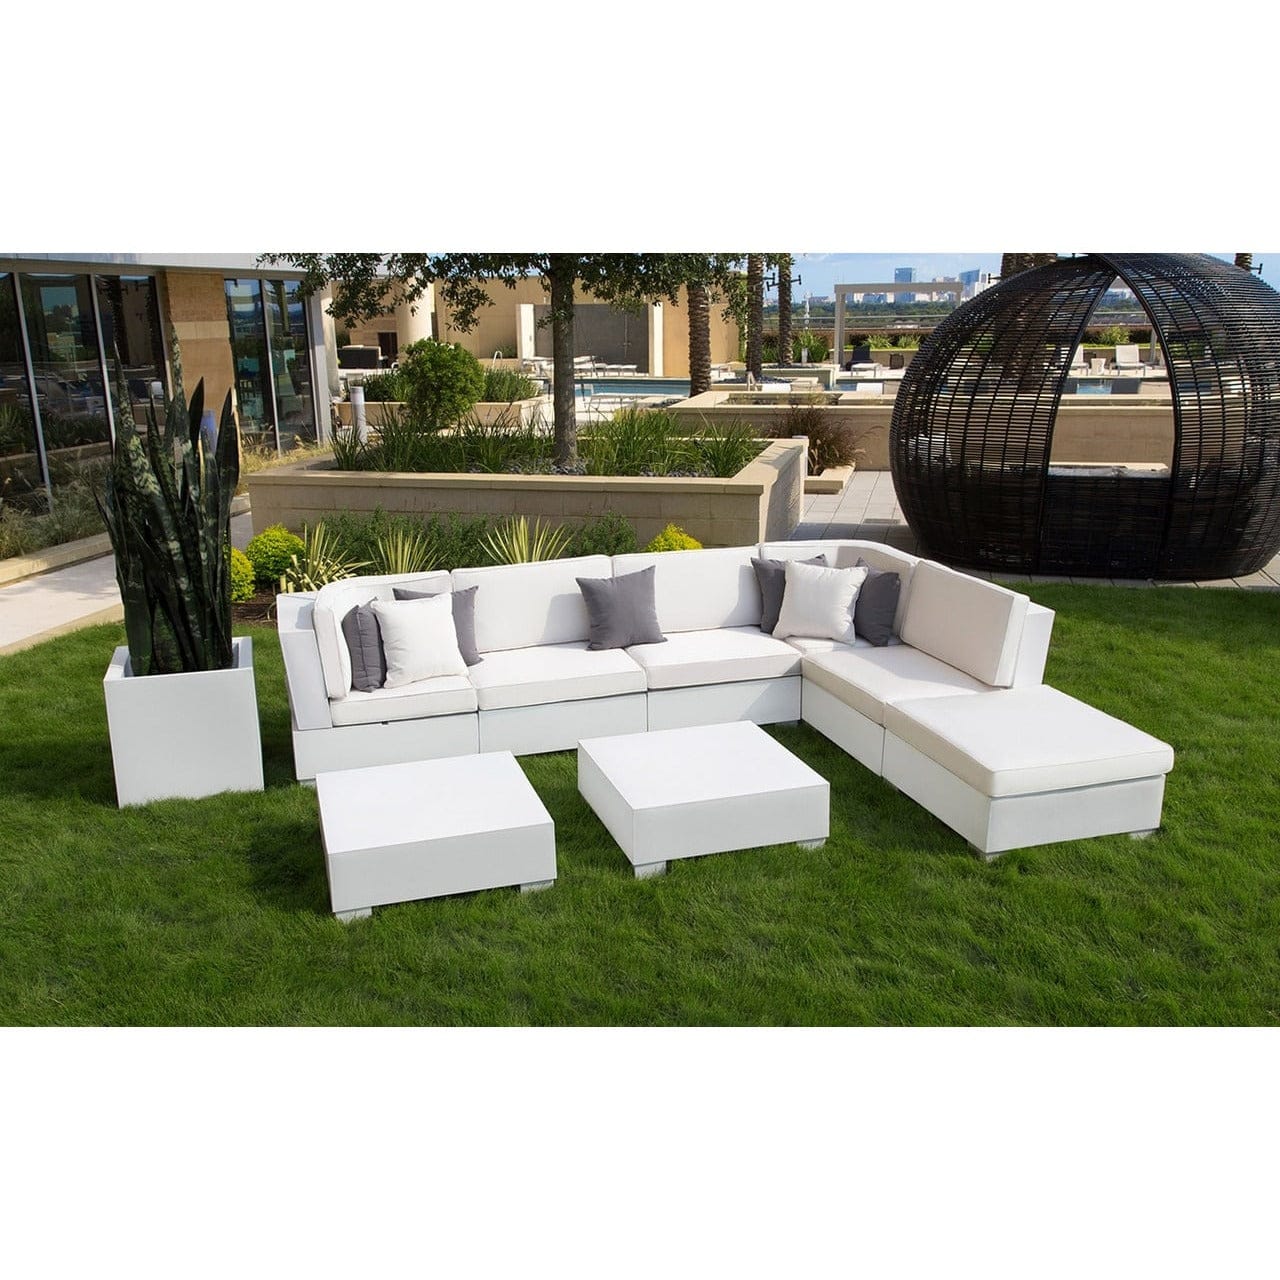 Ledge Lounger 3 Piece in pool Sectional Sofa